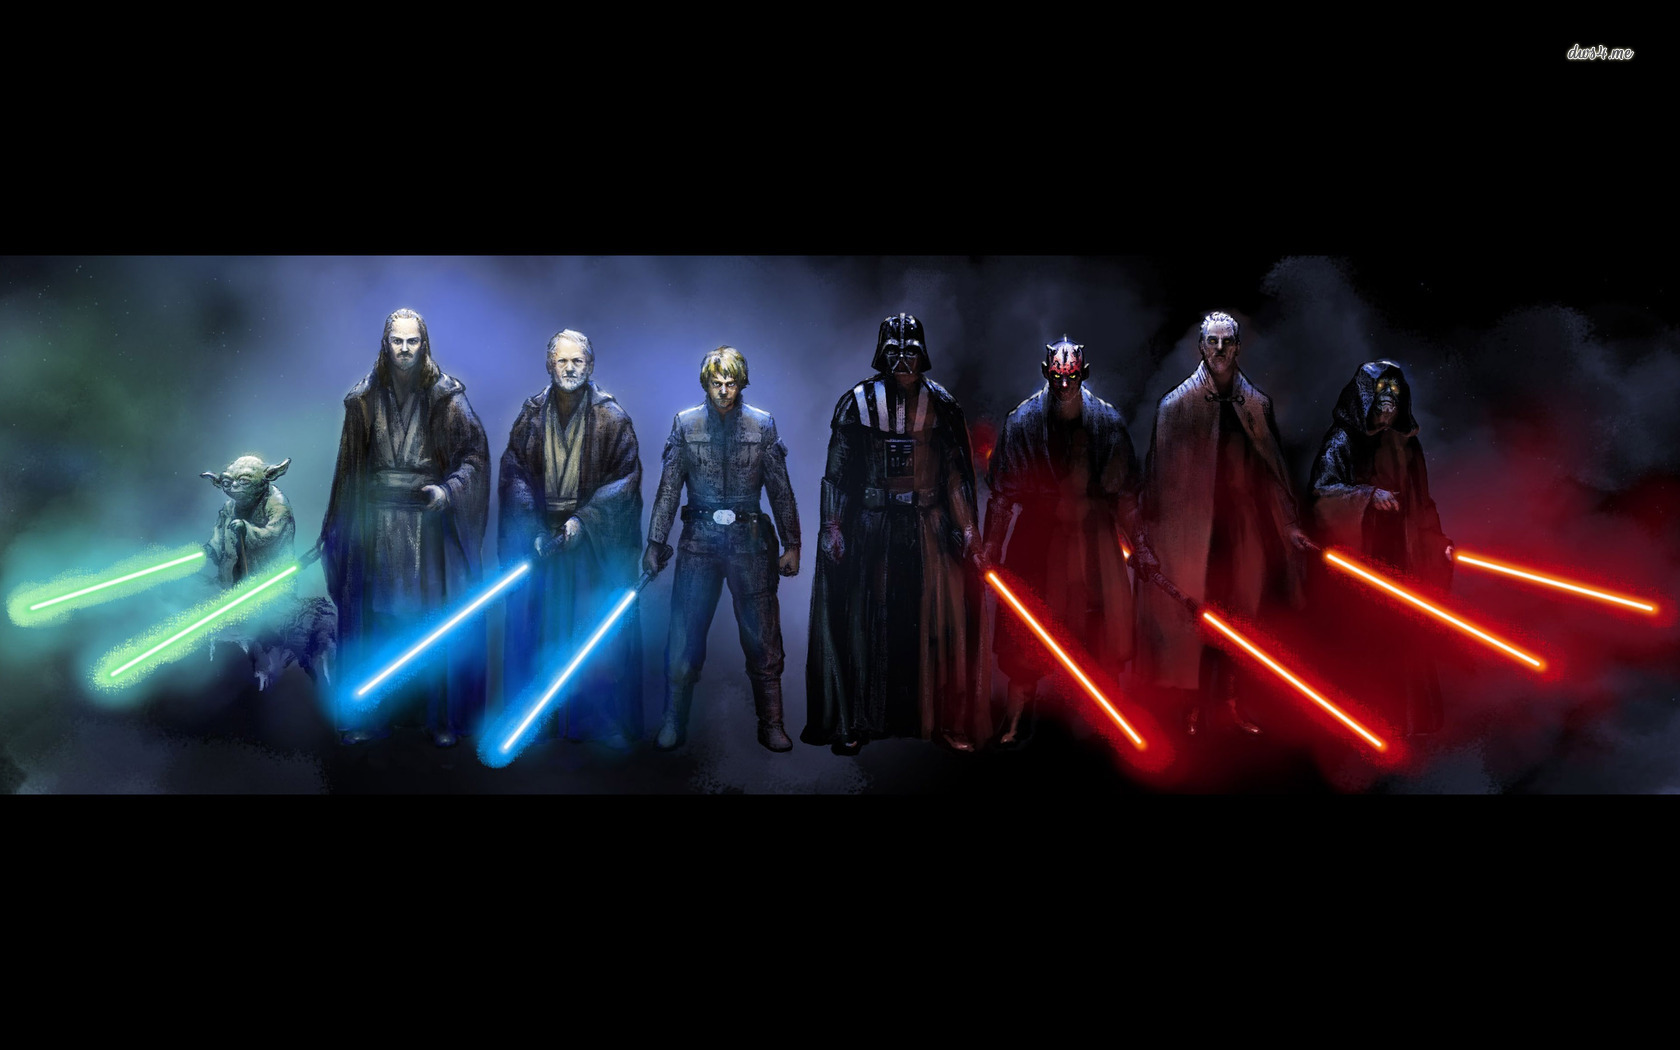 Jedi and Sith   Star Wars wallpaper   Movie wallpapers   17310 1680x1050